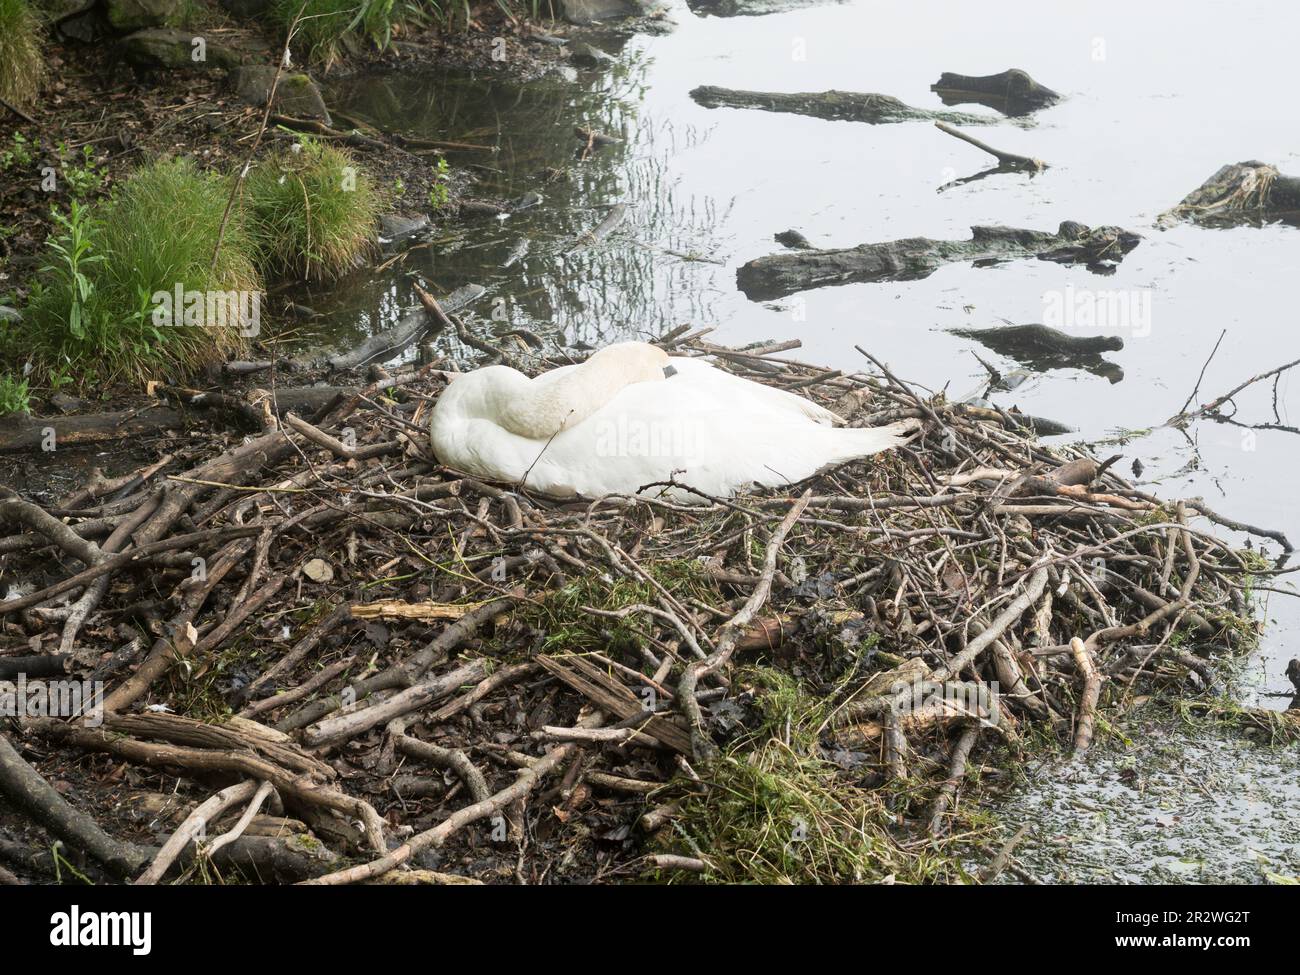 A swan on its nest in Roundhay Park lake, Leeds, England, UK Stock Photo